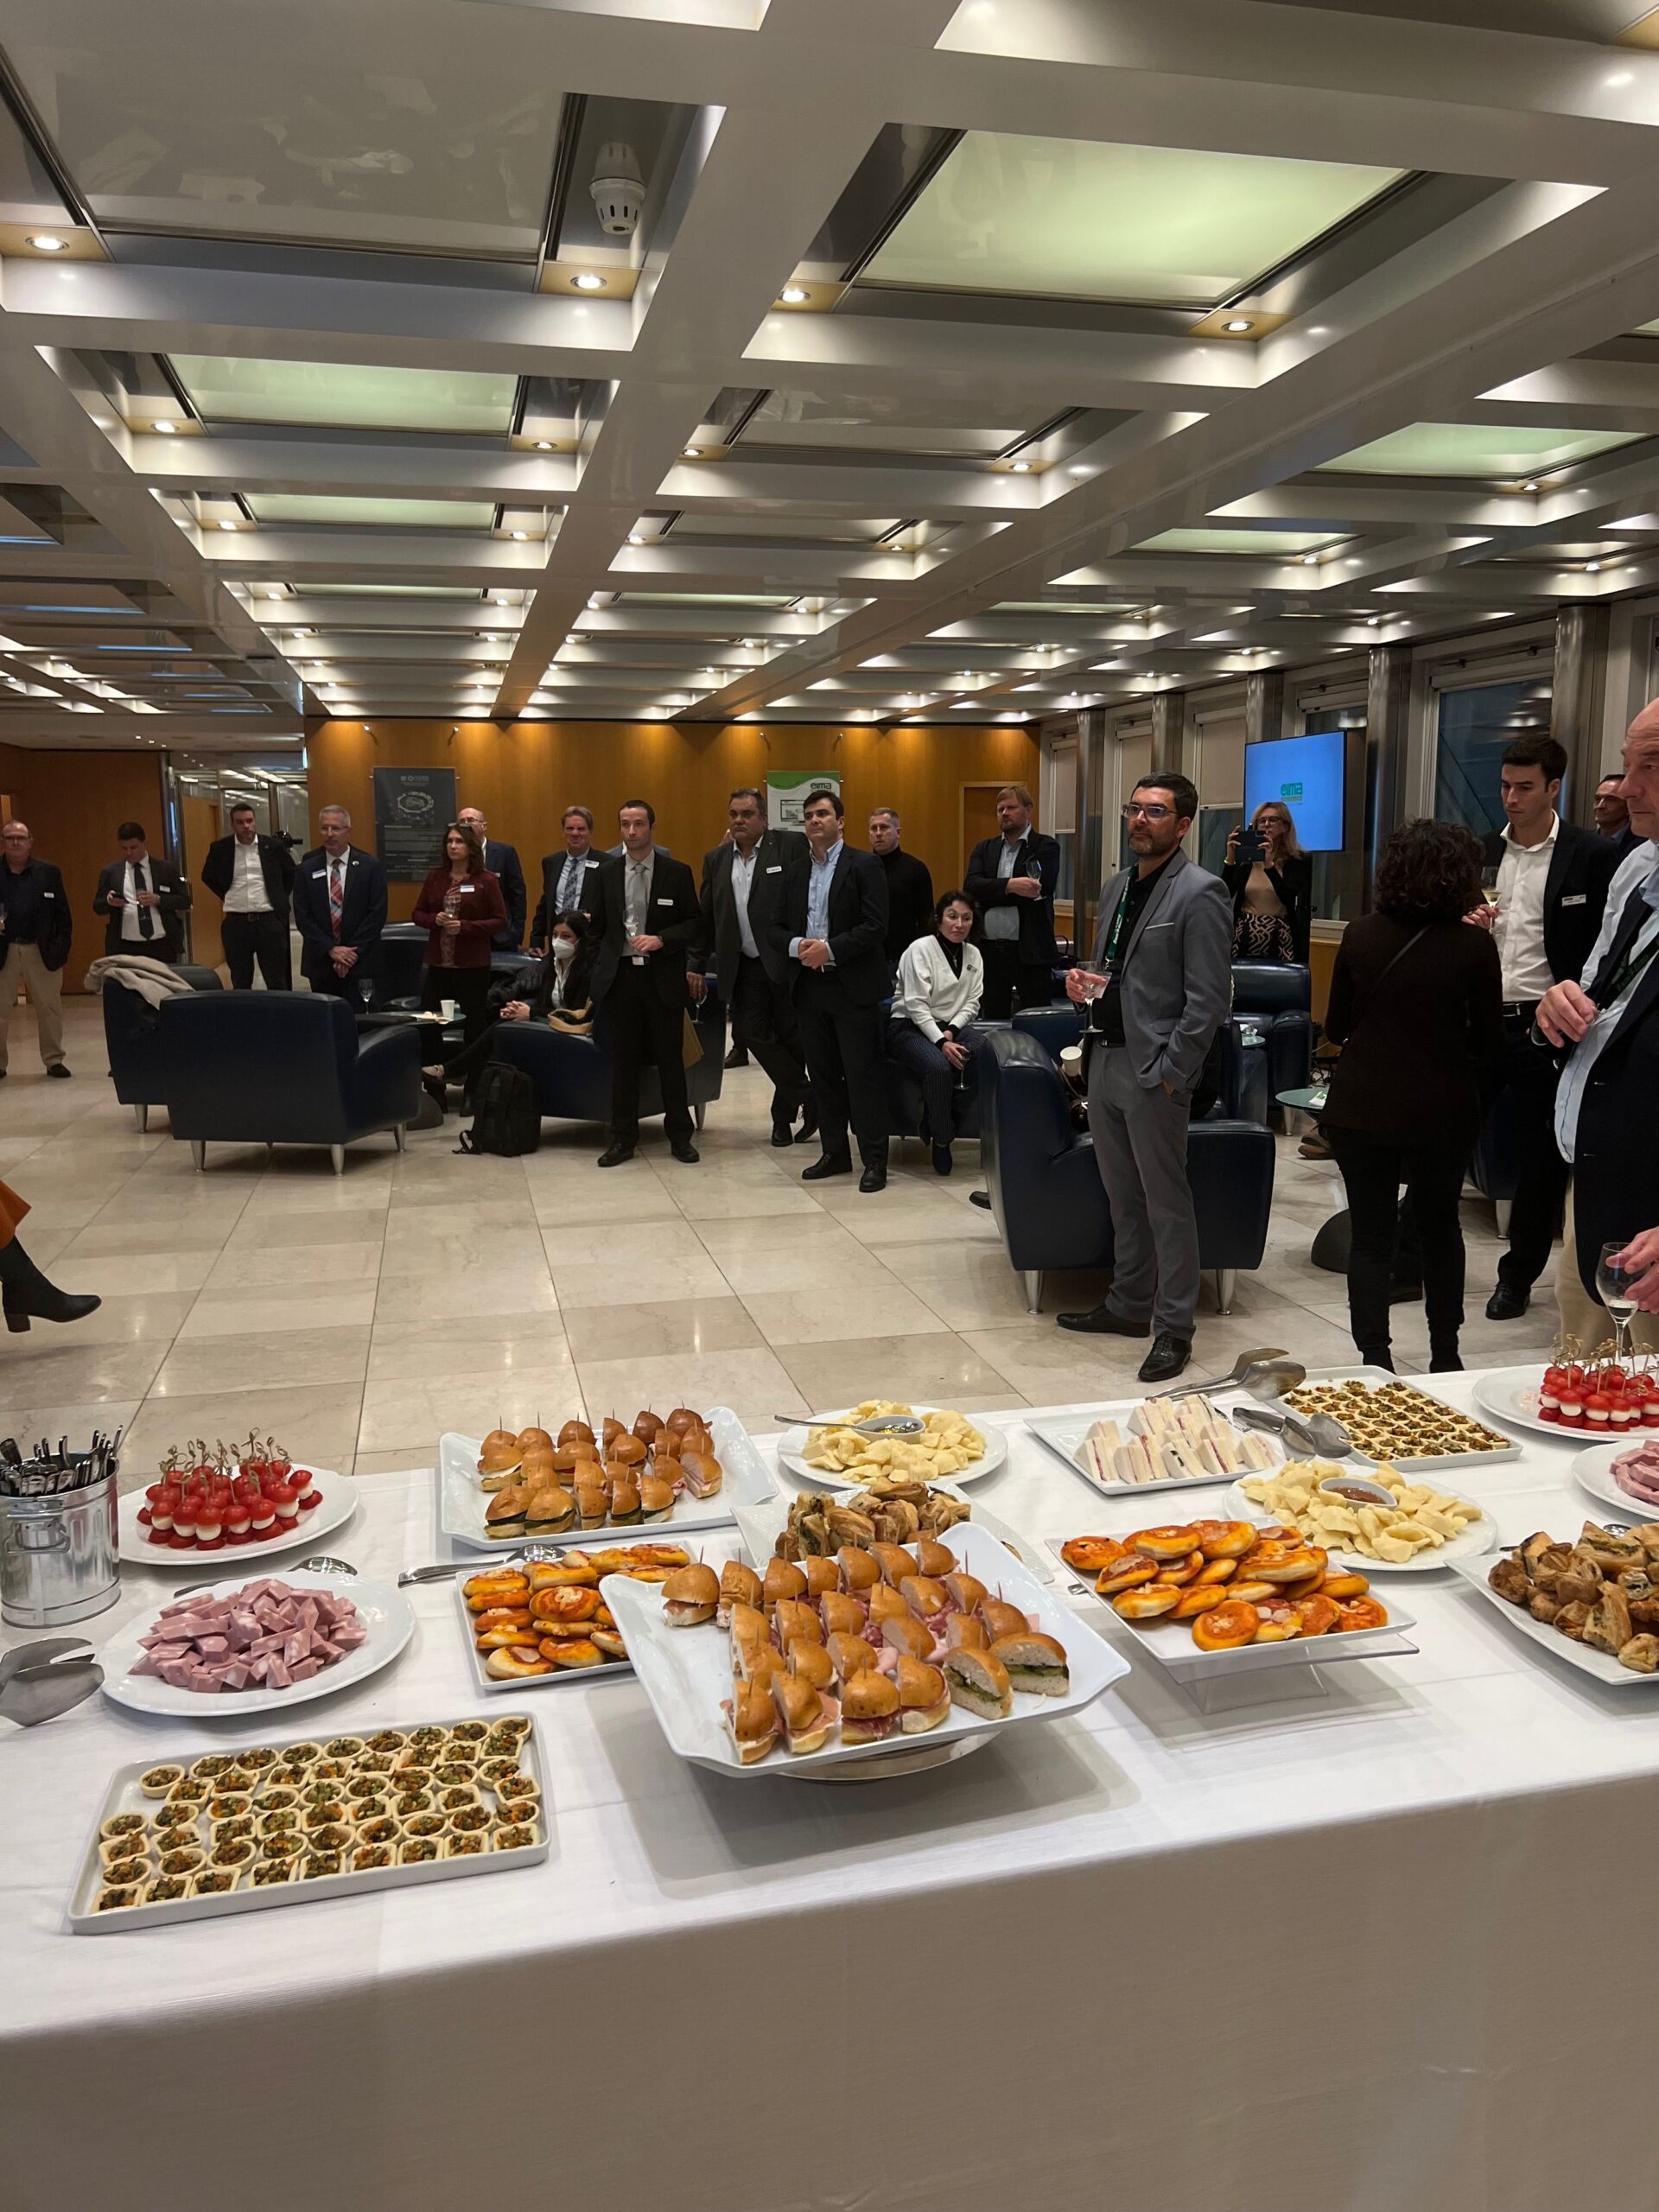 EIMA show : the European Irrigation Association held a cocktail party on November 10, 2022